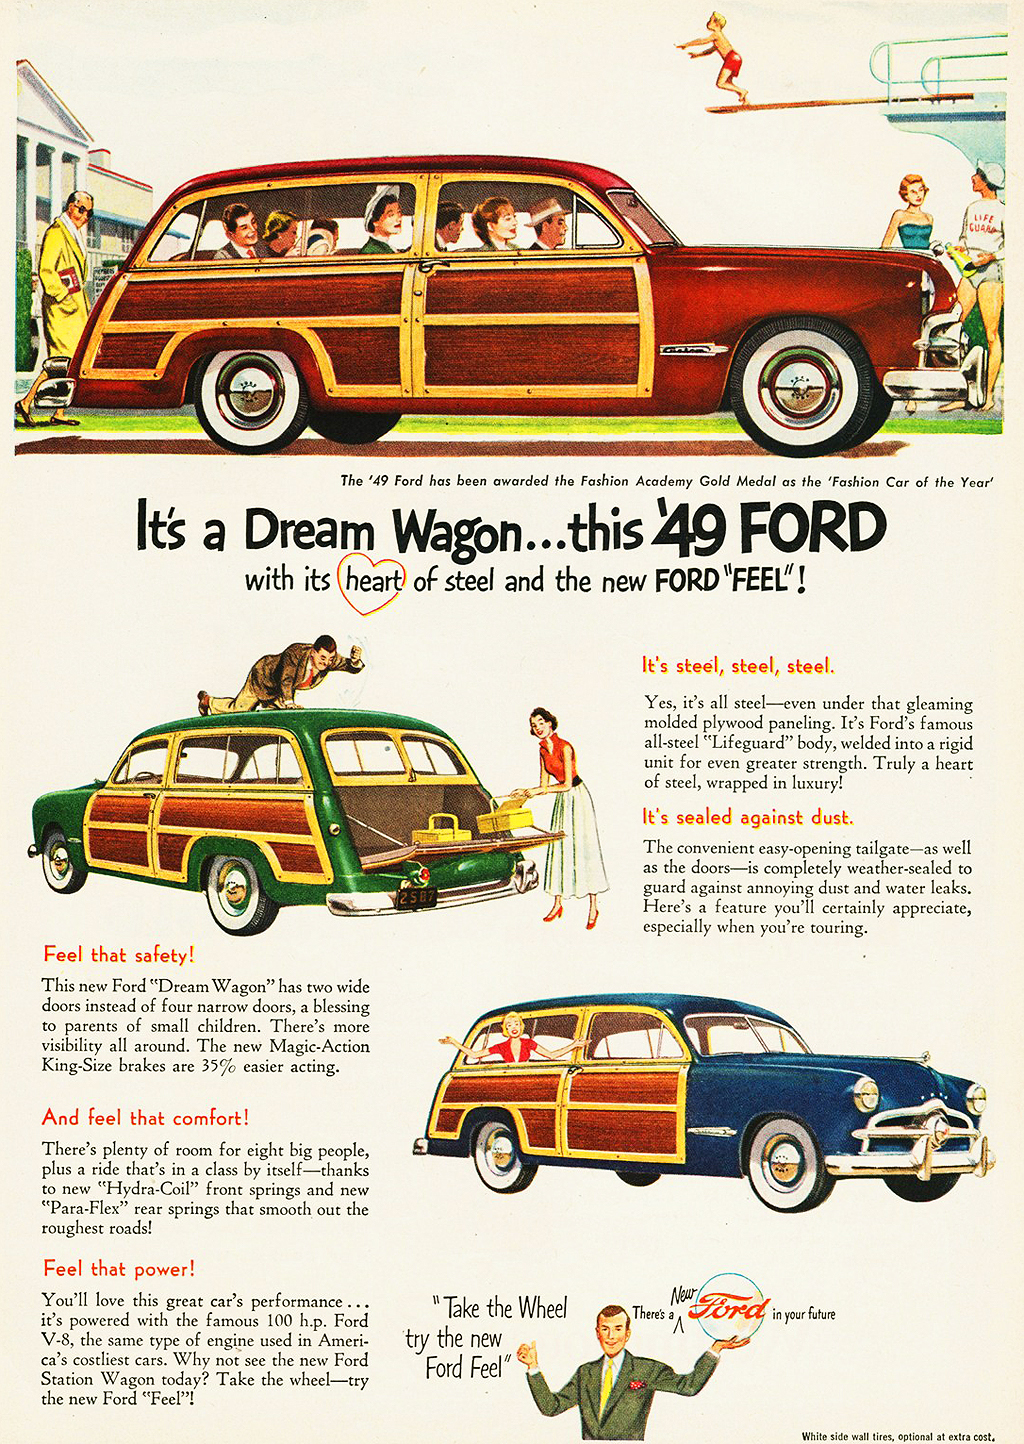 1949 Ford Woodie wagon